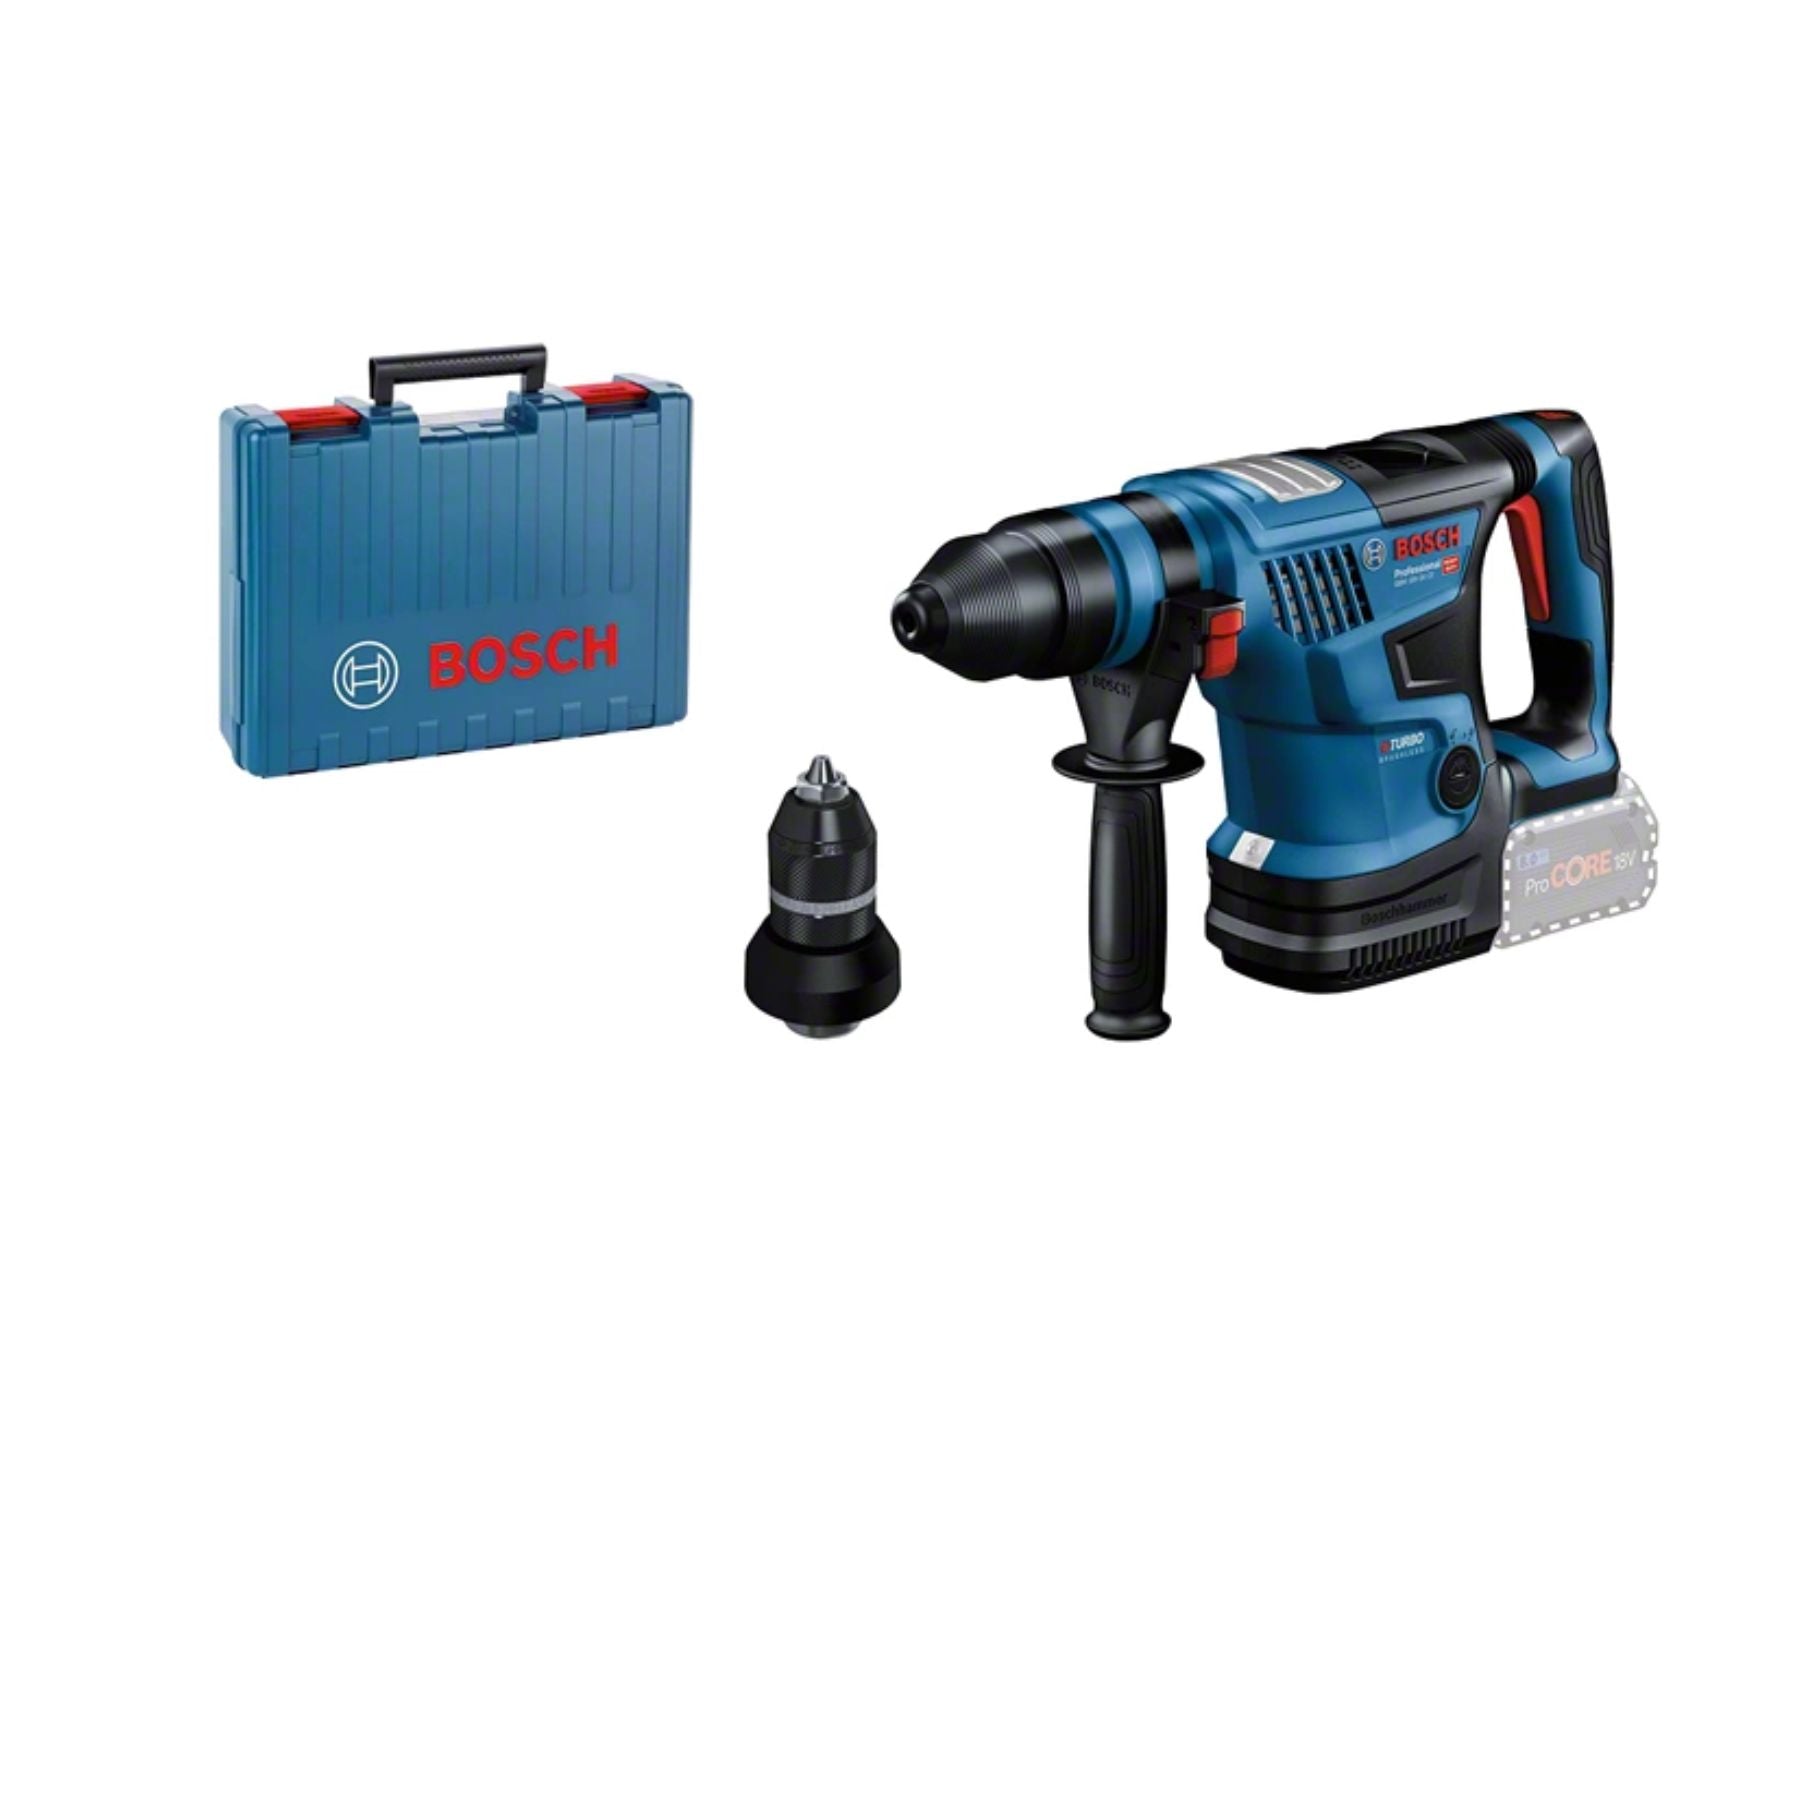 Bosh GBH 18V-34 CF (Solo) Cordless Rotary Hammer Biturbo with SDS plus